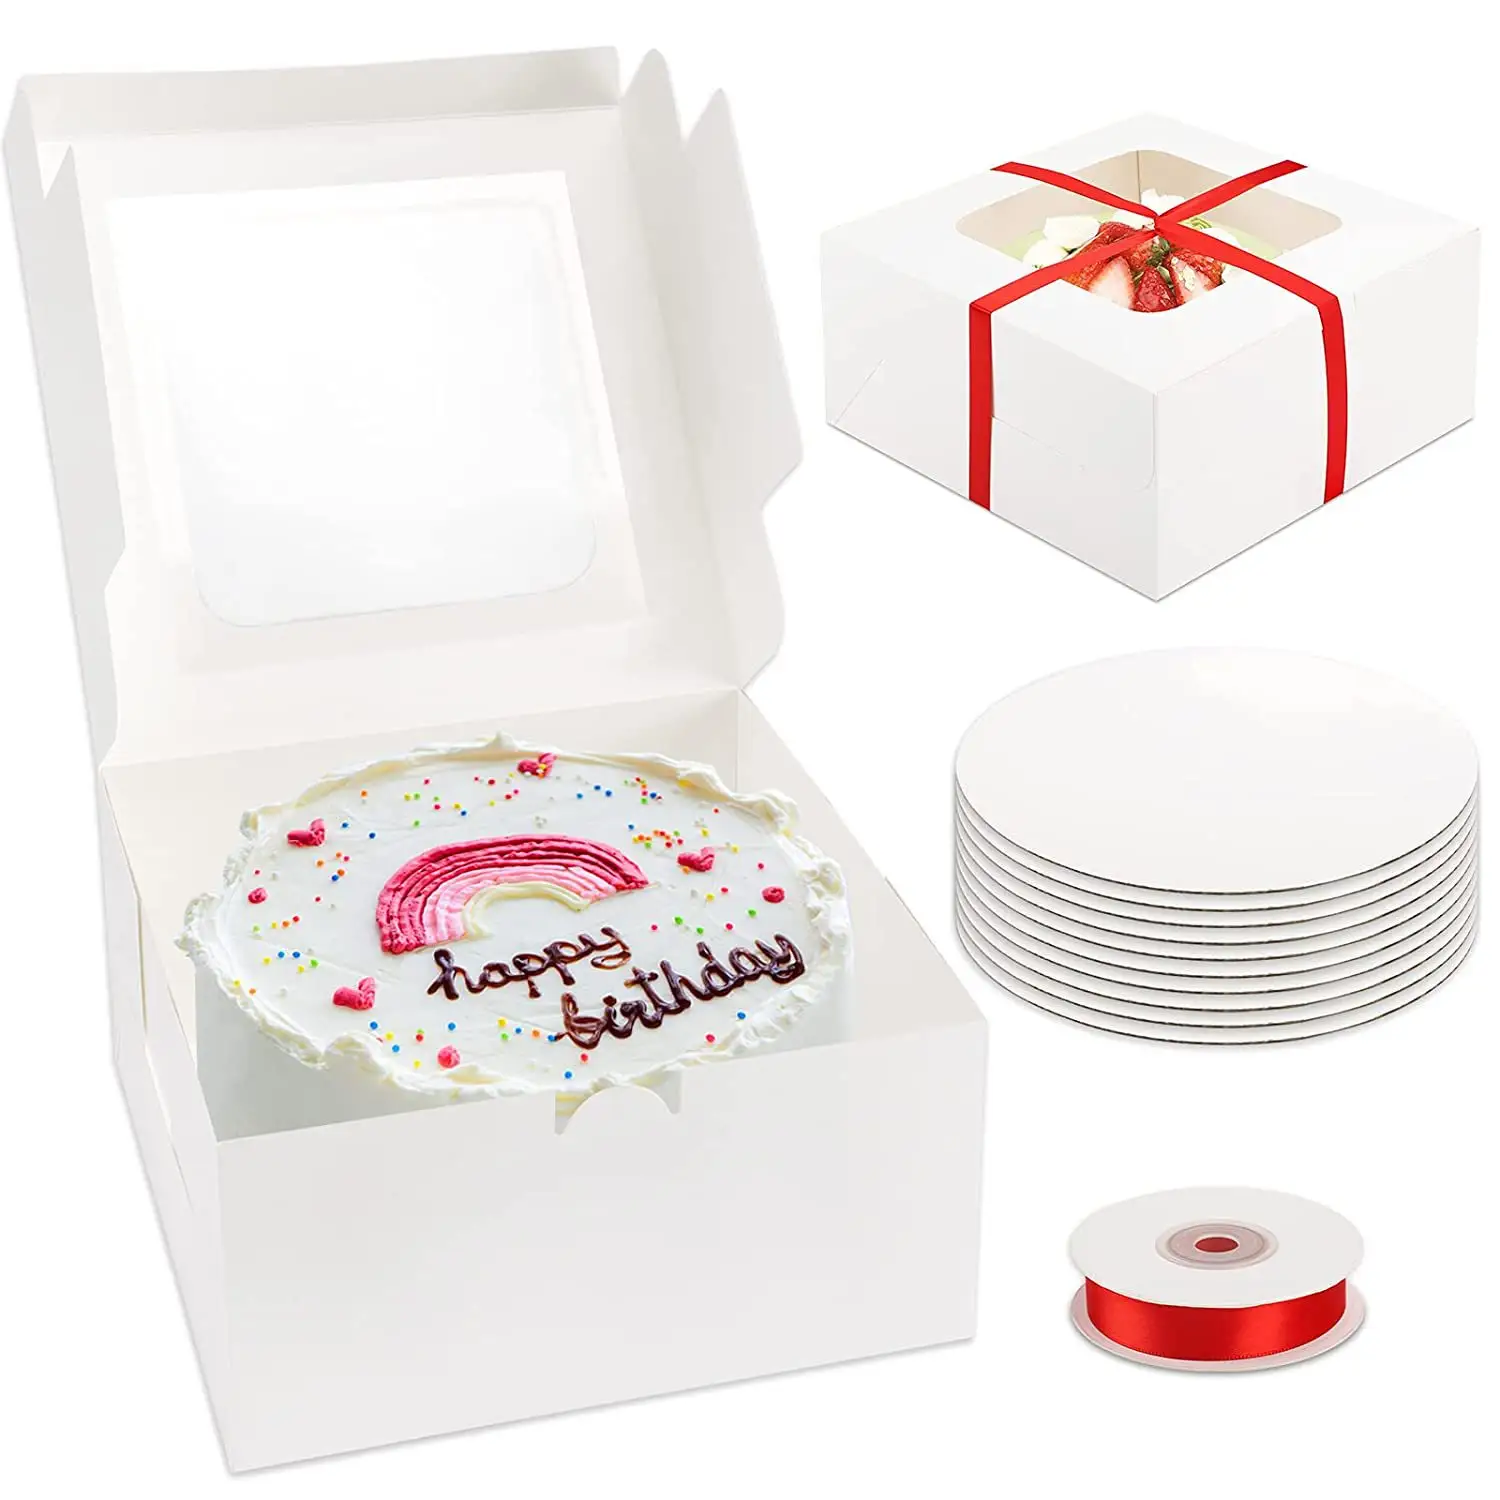 10*10*5inch Custom Wedding Party White Square Cheese Pastry Bakery Cake Packaging Box With Transparent Window